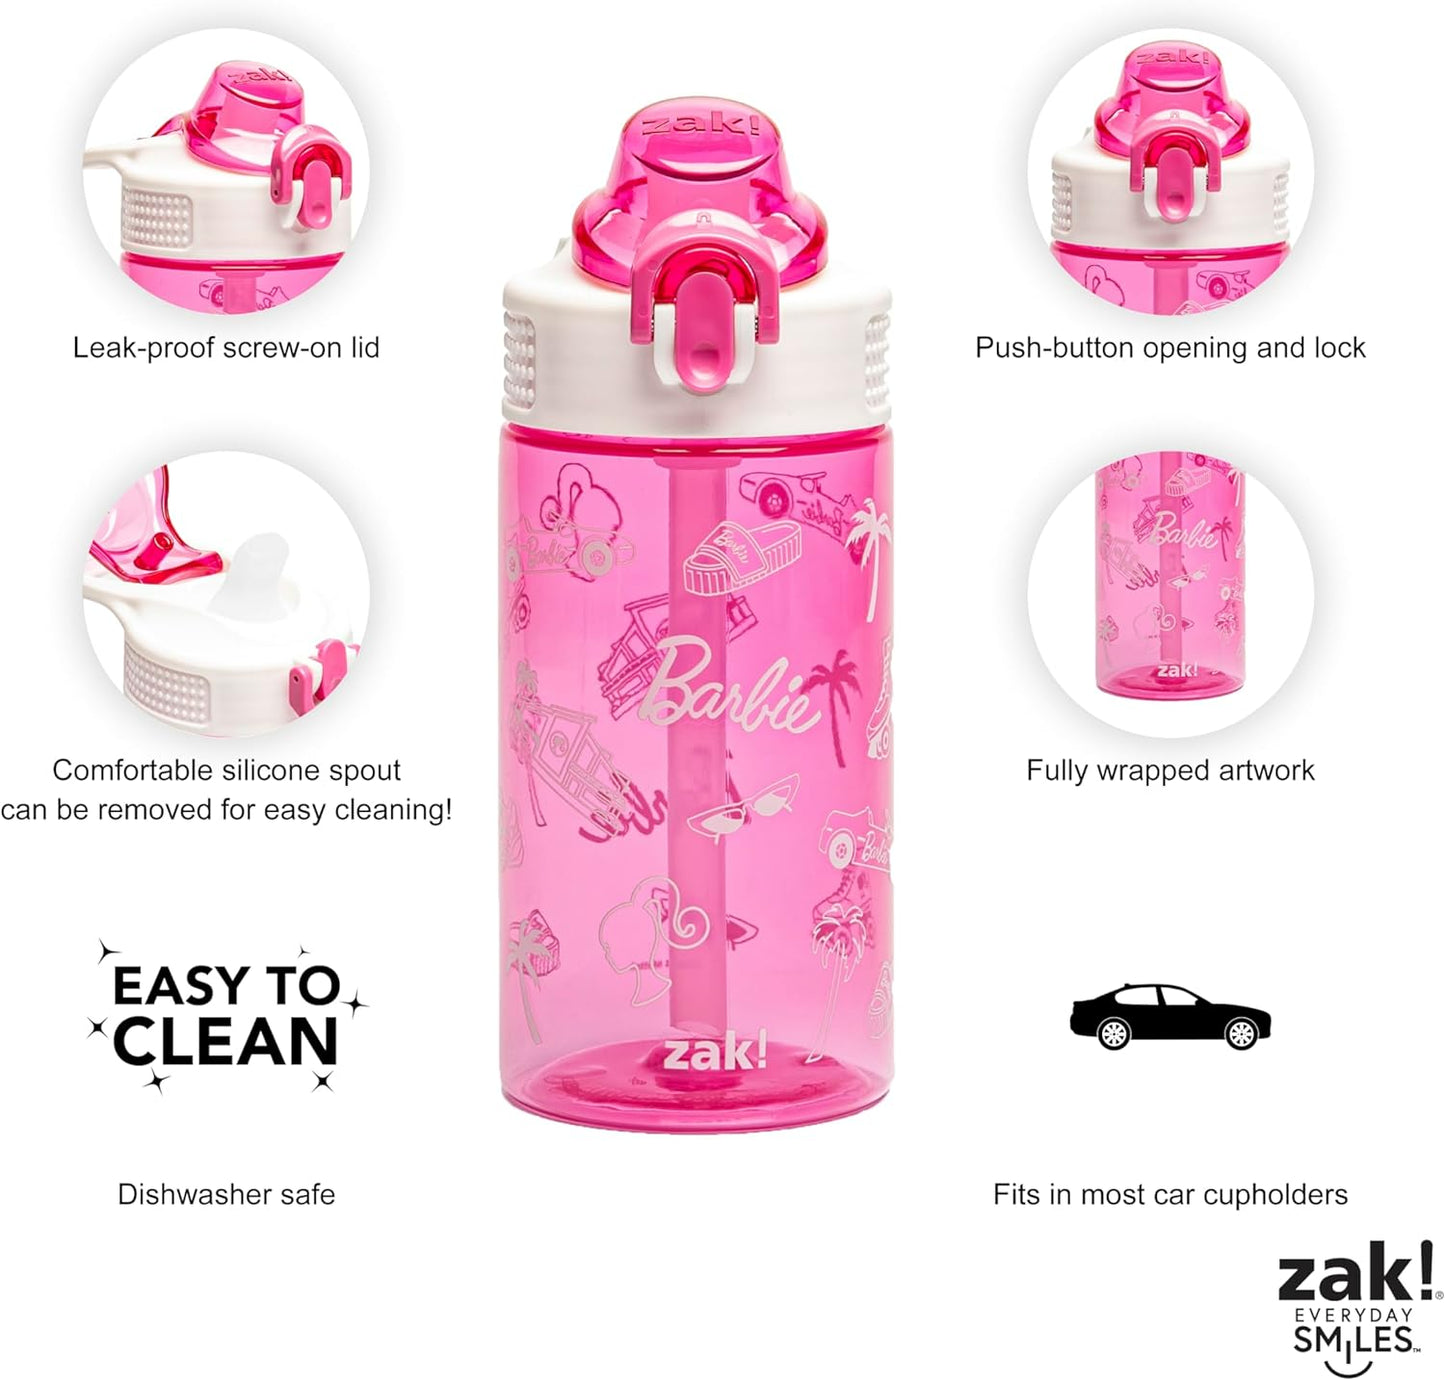 Sage Barbie Water Bottle for School or Travel, 16Oz Durable Plastic Water Bottle with Straw, Handle, and Leak-Proof, Pop-Up Spout Cover (Barbie)